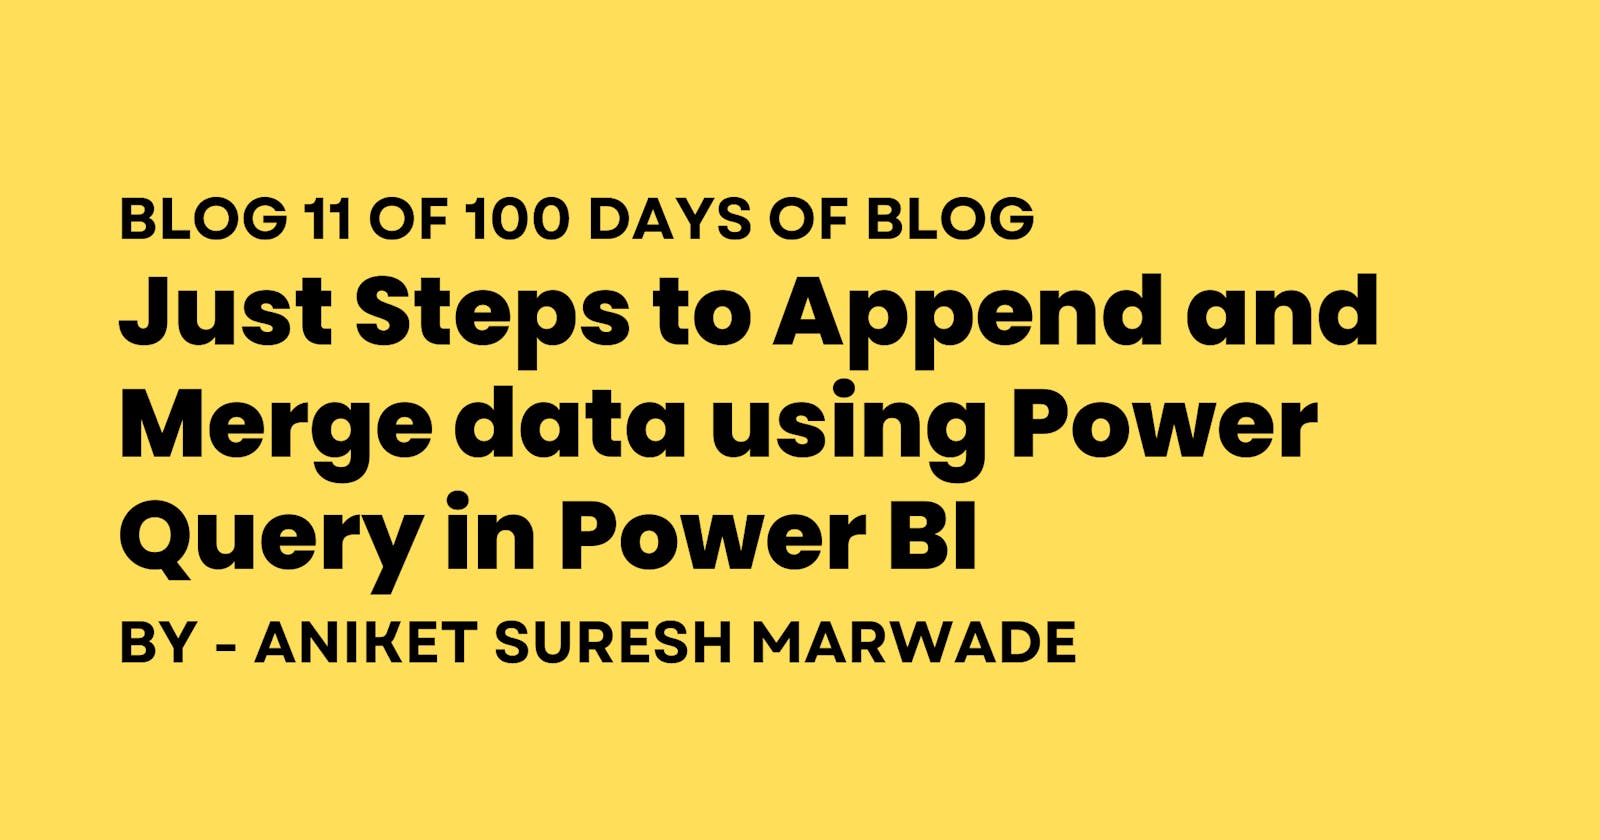 Just Steps to Append and Merge data using Power Query in Power BI